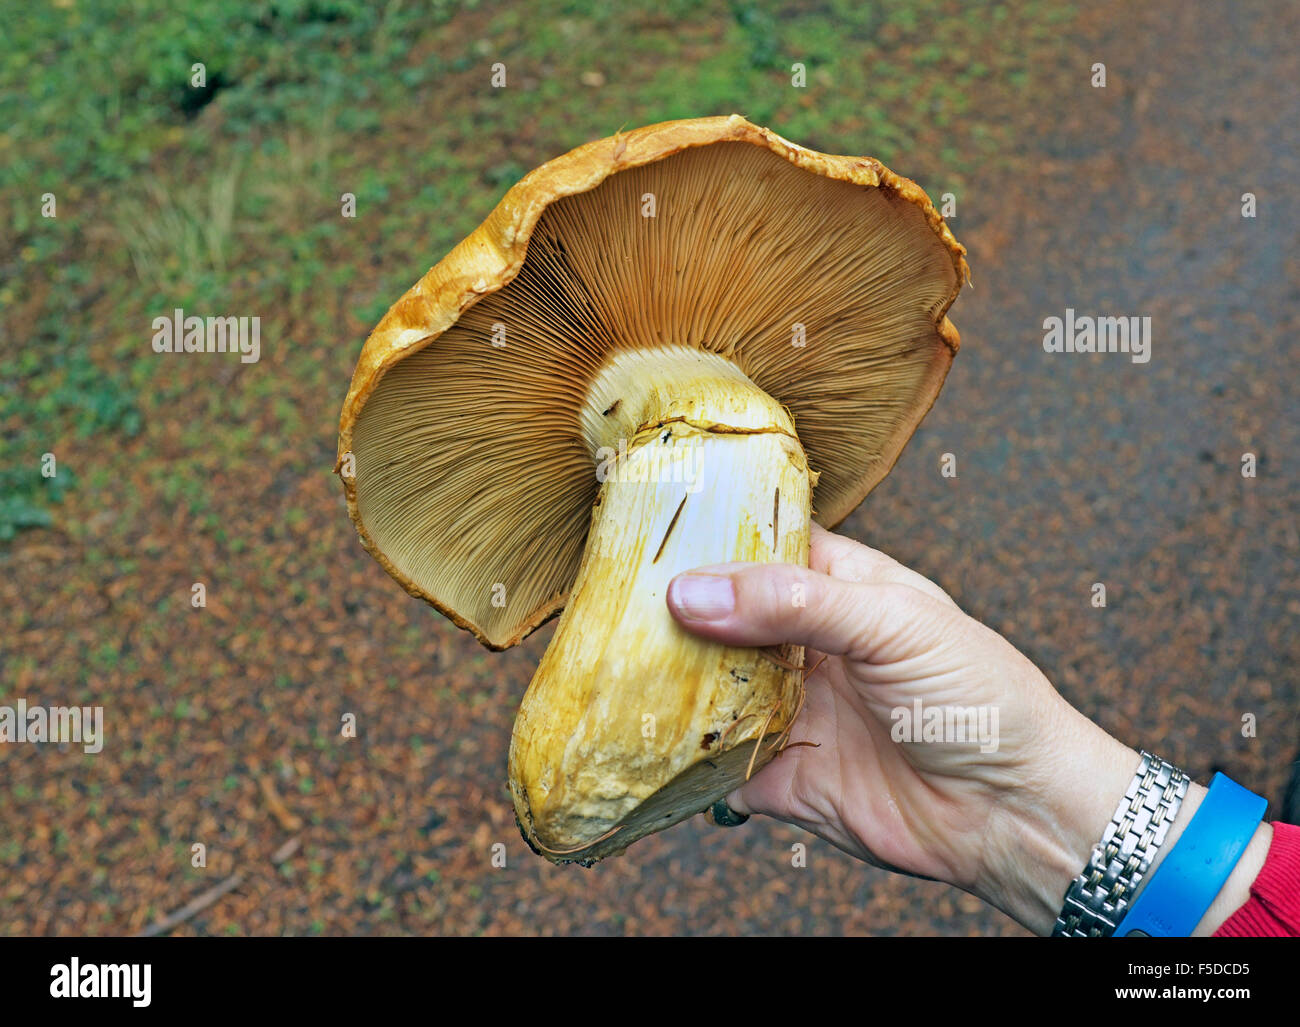 An example of Gymnopilus spectabilis, or Big Laughing Gym mushroom, in a spruce/fir forest in the Pacific Northwest Stock Photo